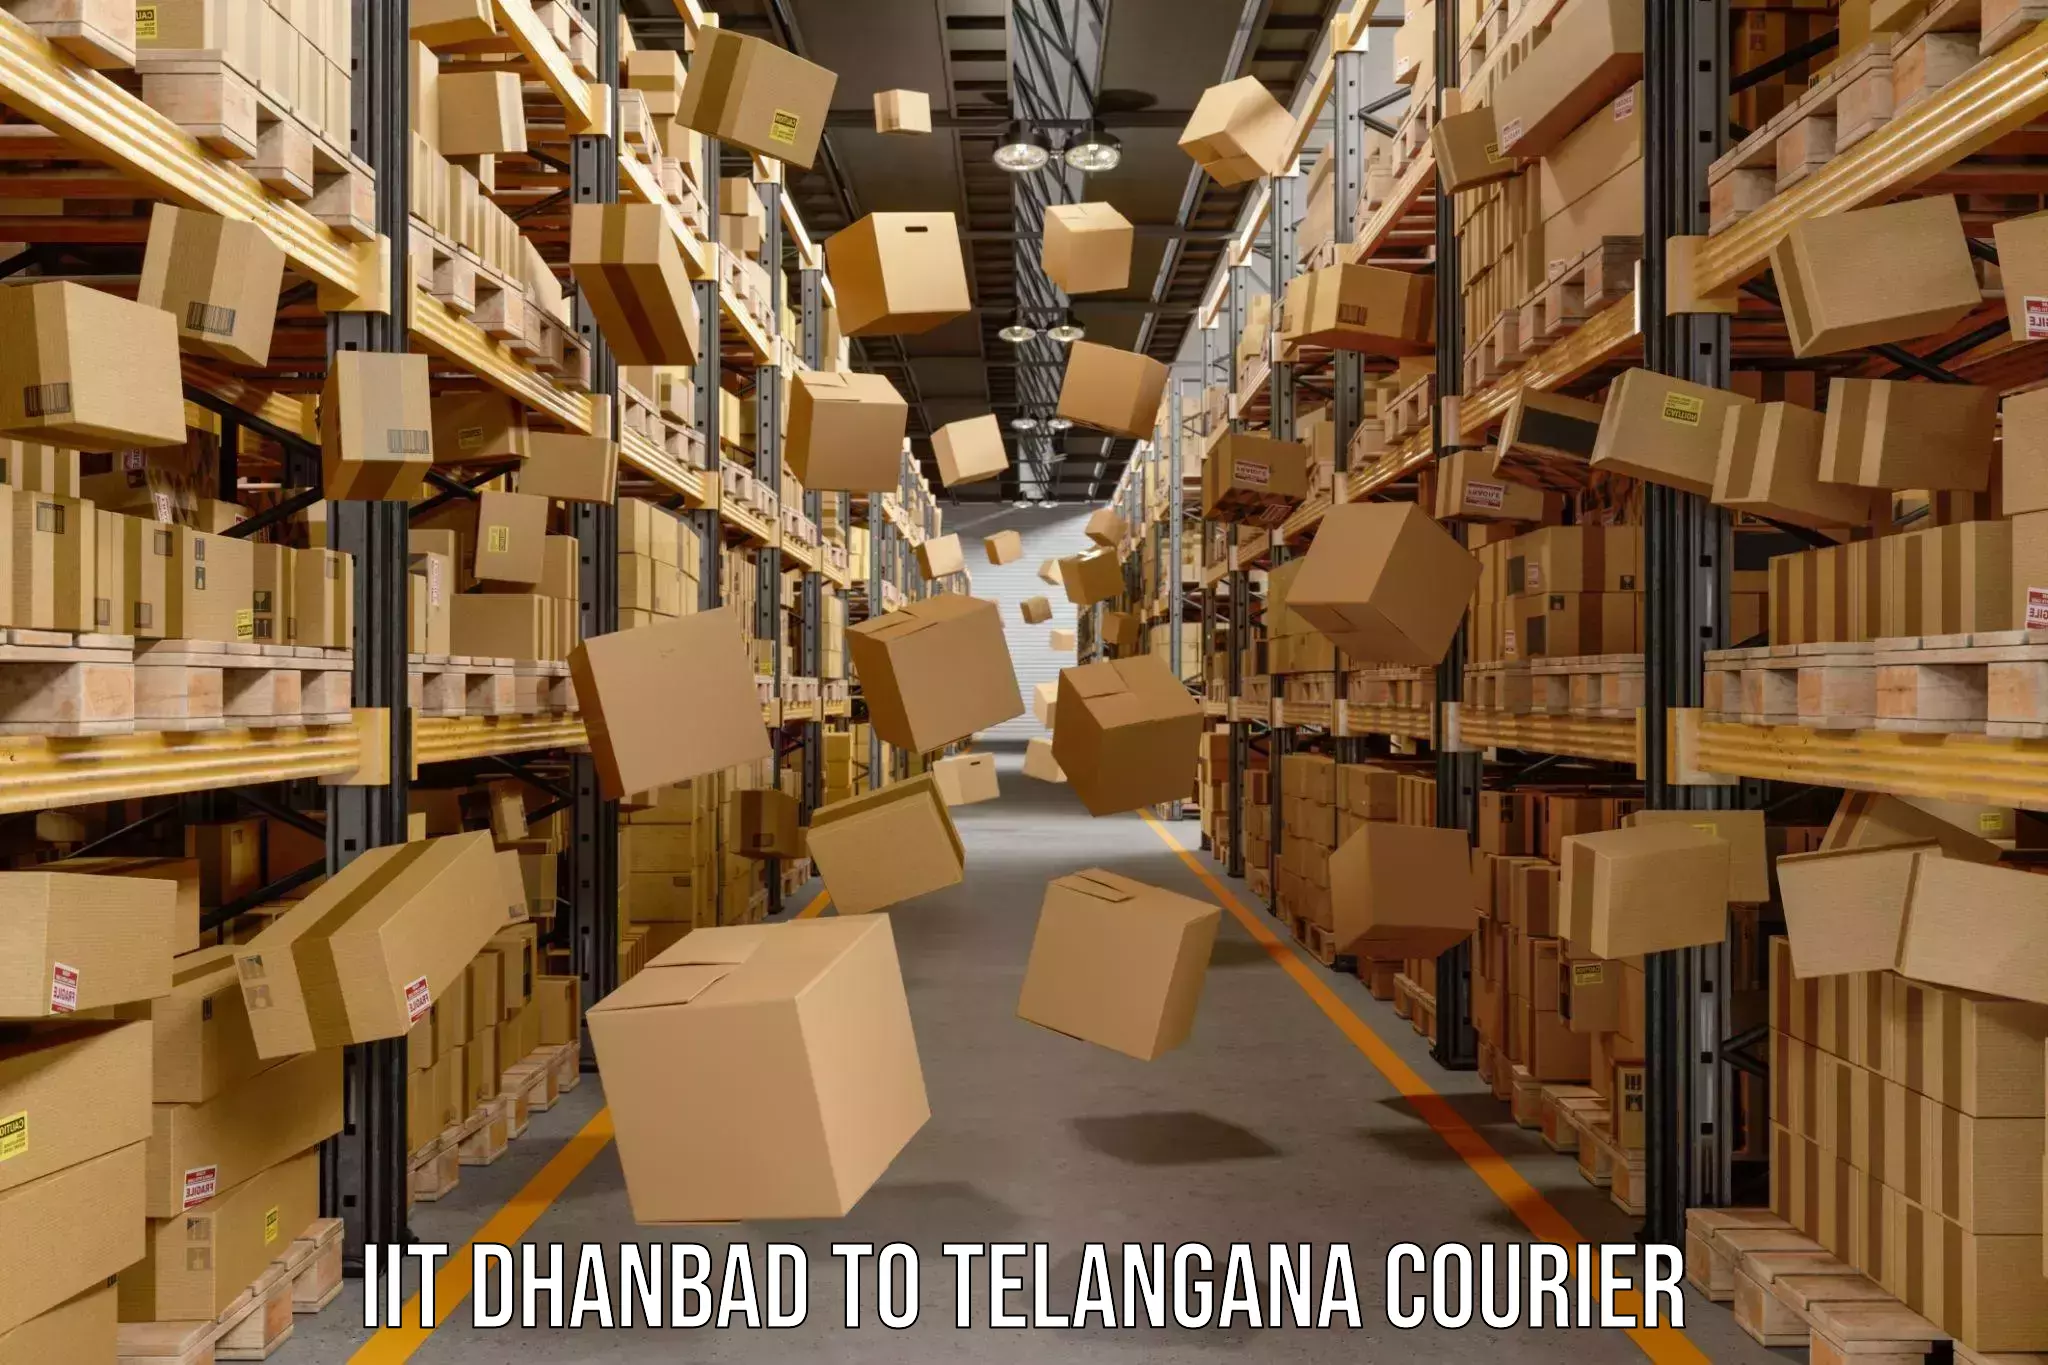 Express logistics providers IIT Dhanbad to Secunderabad